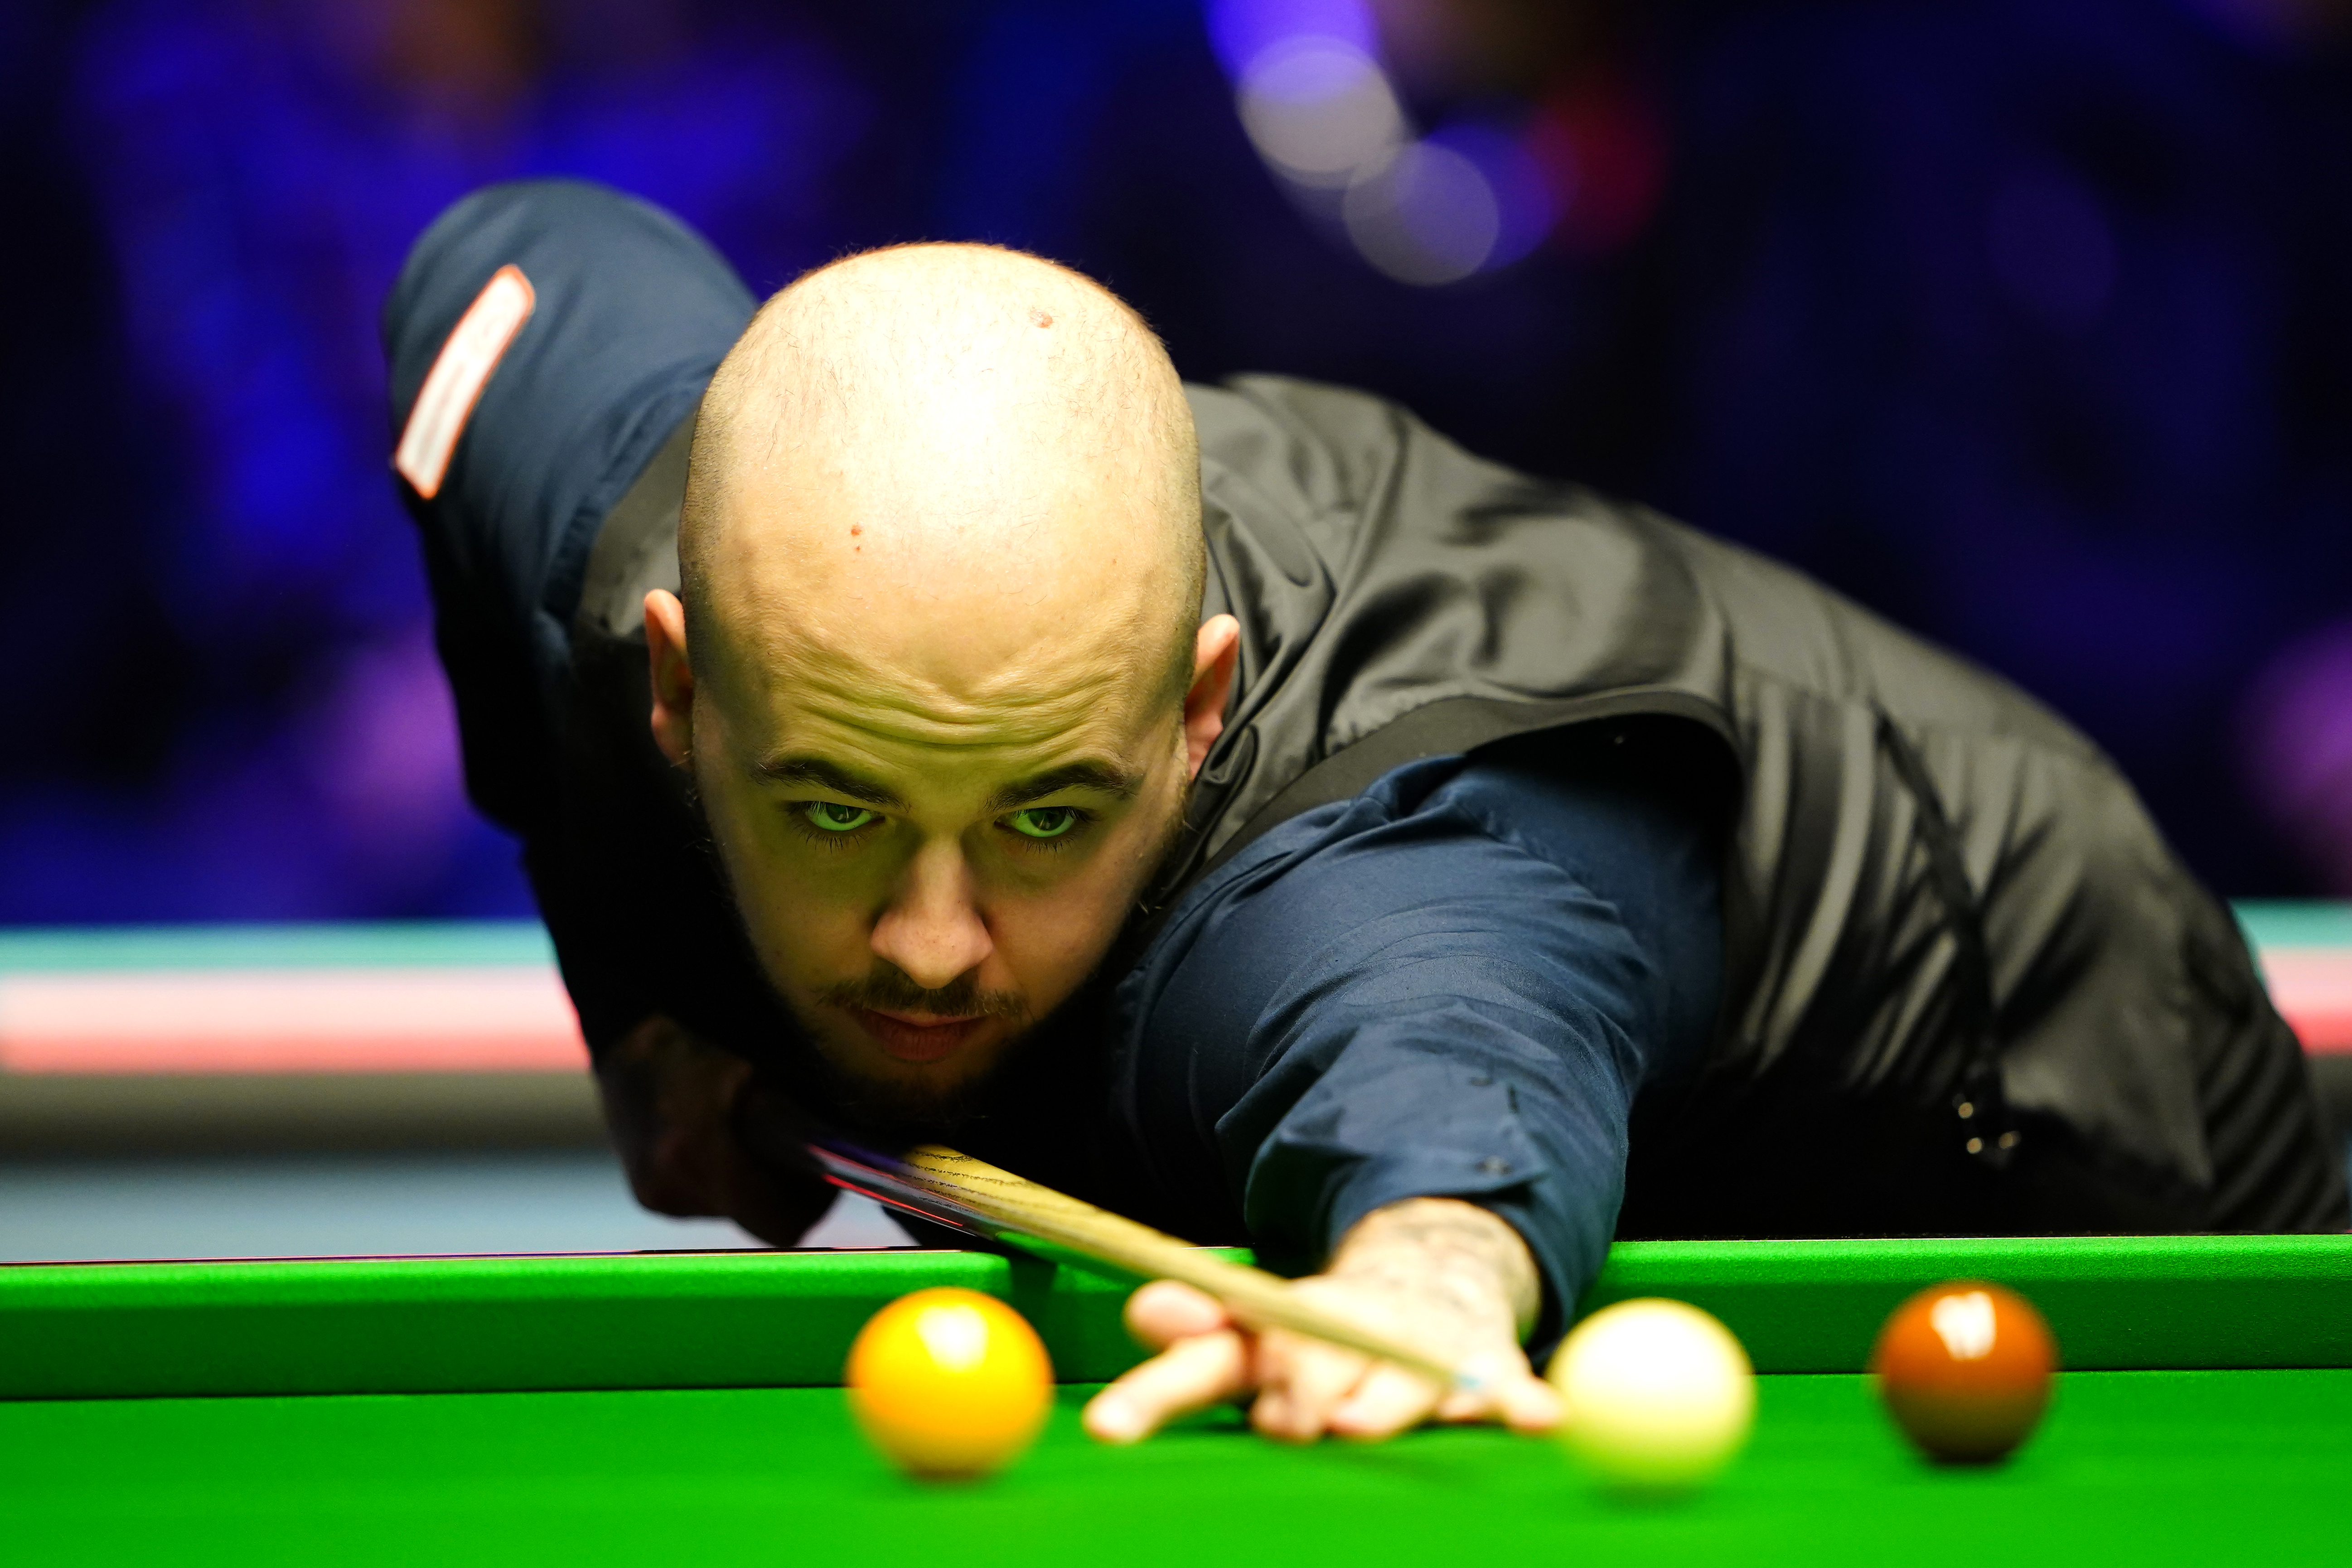 Snooker results Luca Brecel beats Jack Lisowski 6-4 at the Players Championship